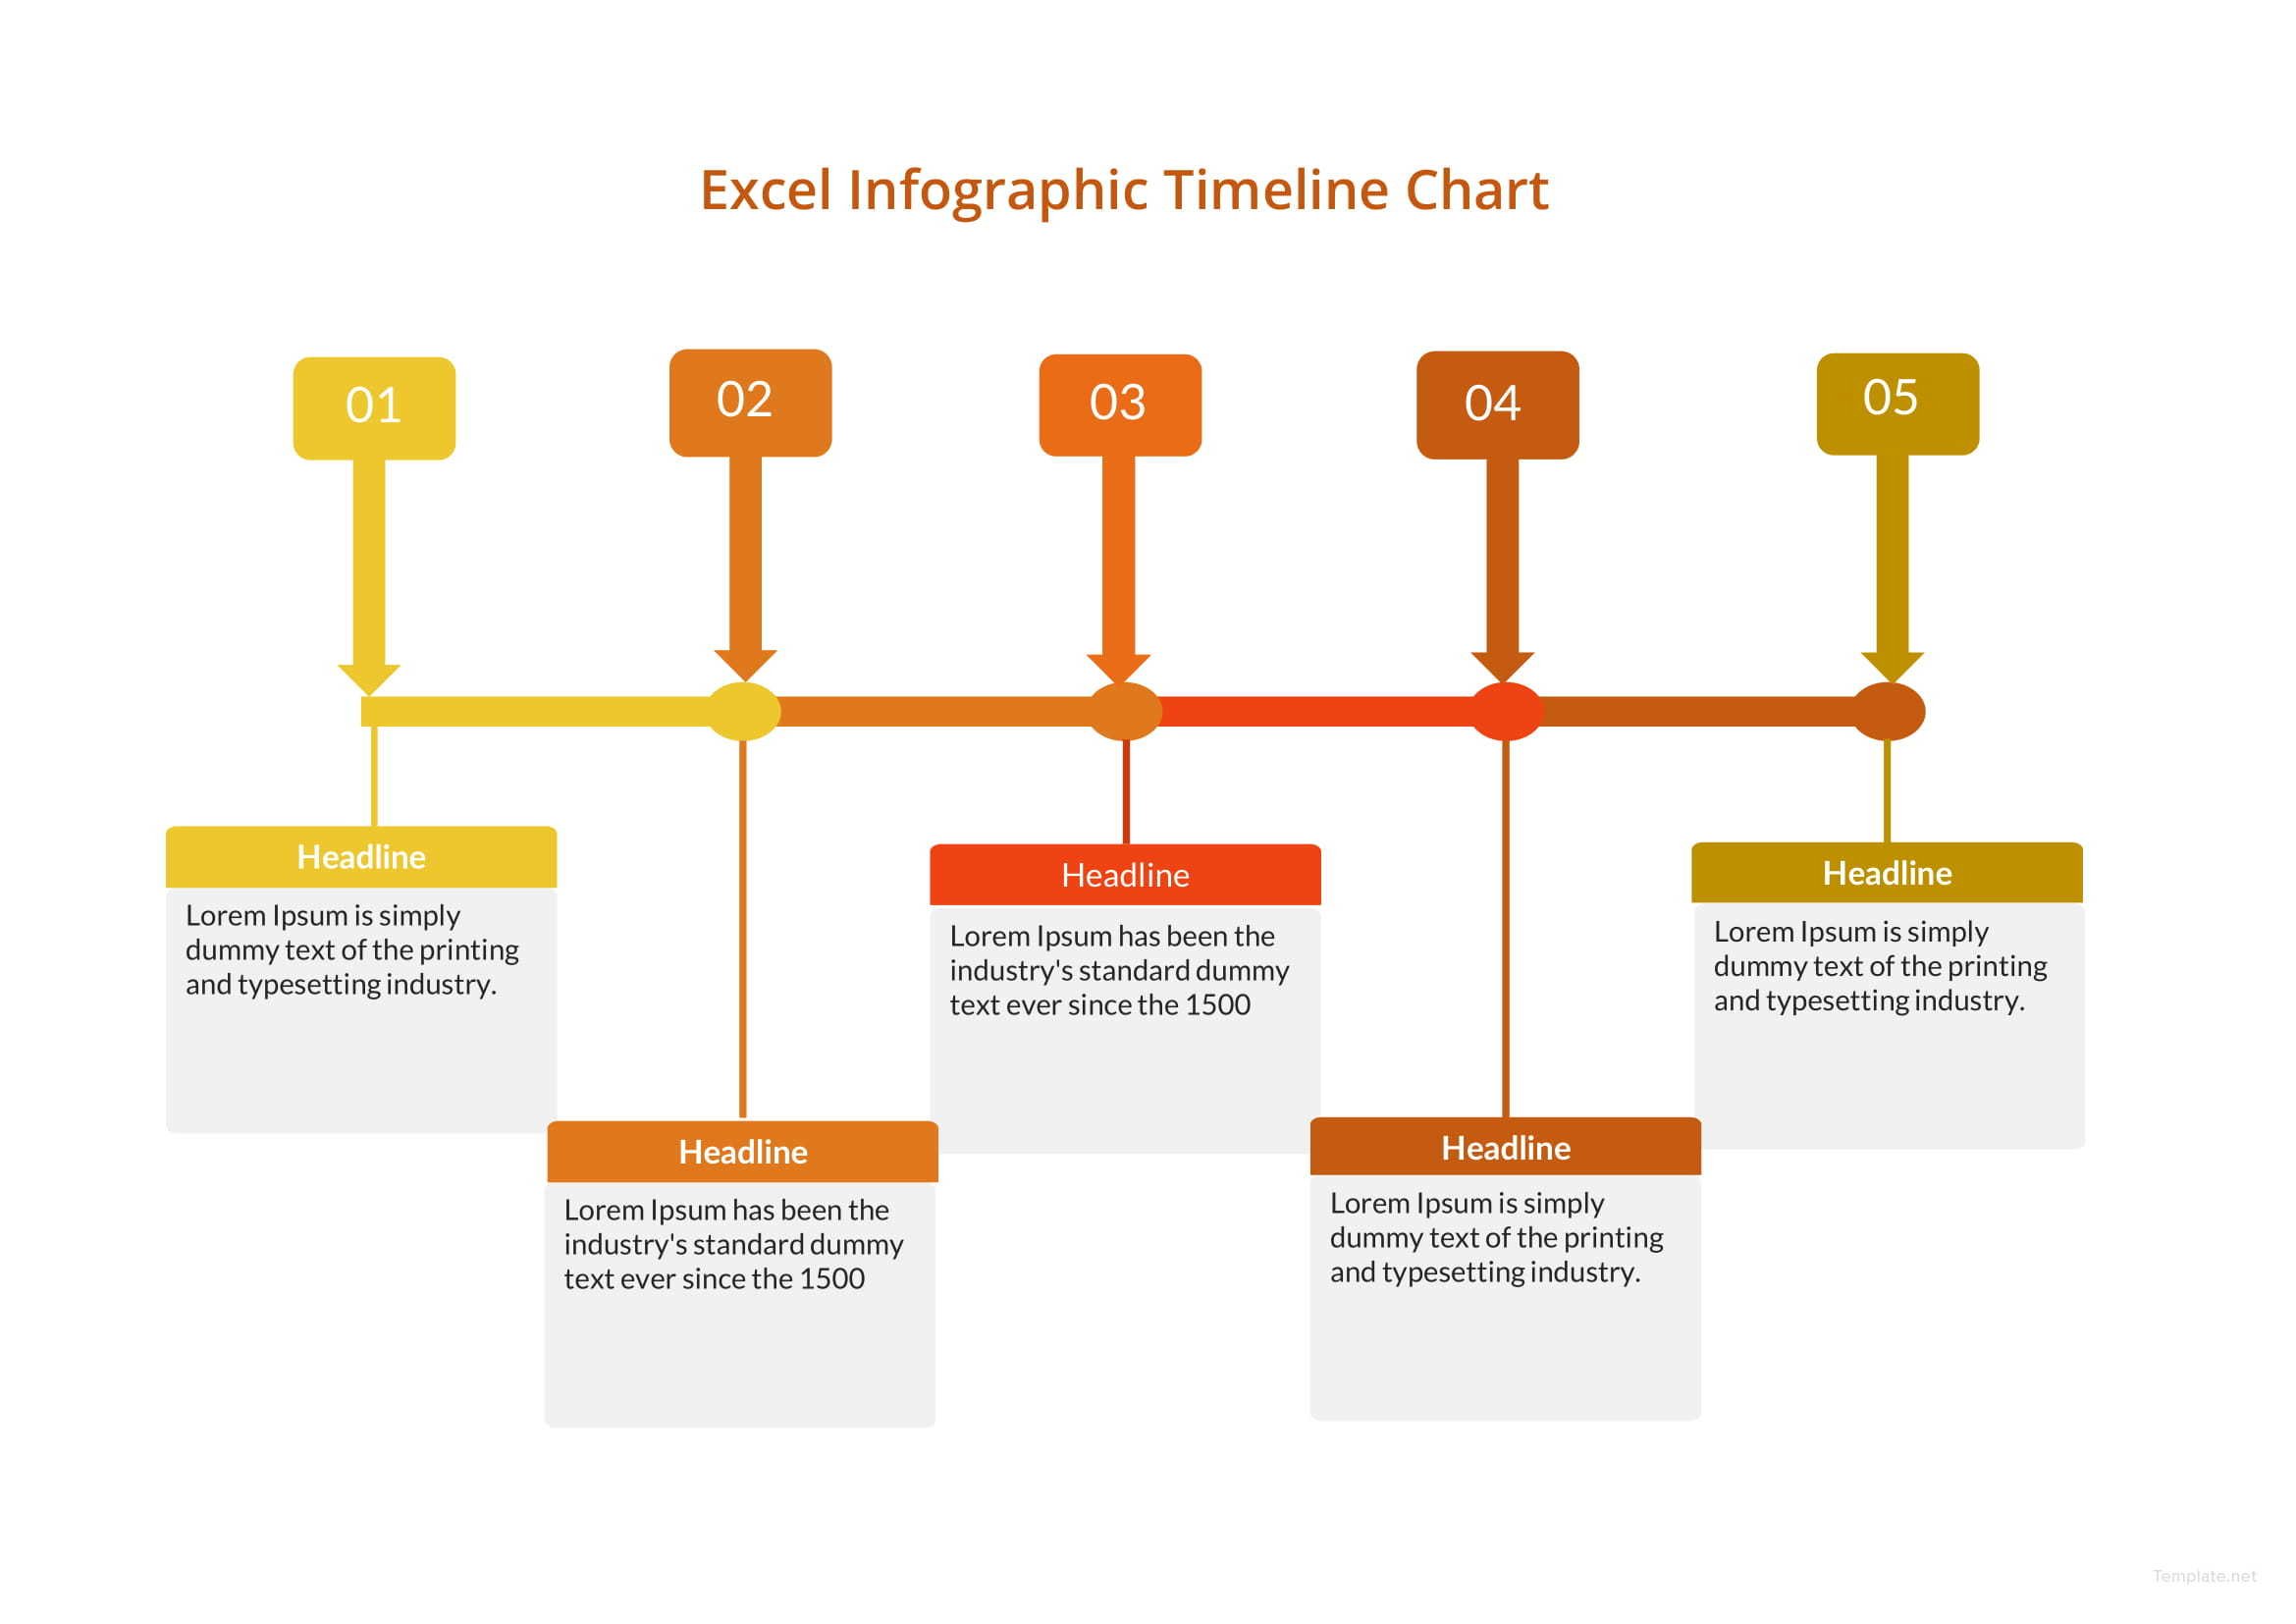 Timeline Infographic Chart Template in Microsoft Word, Excel